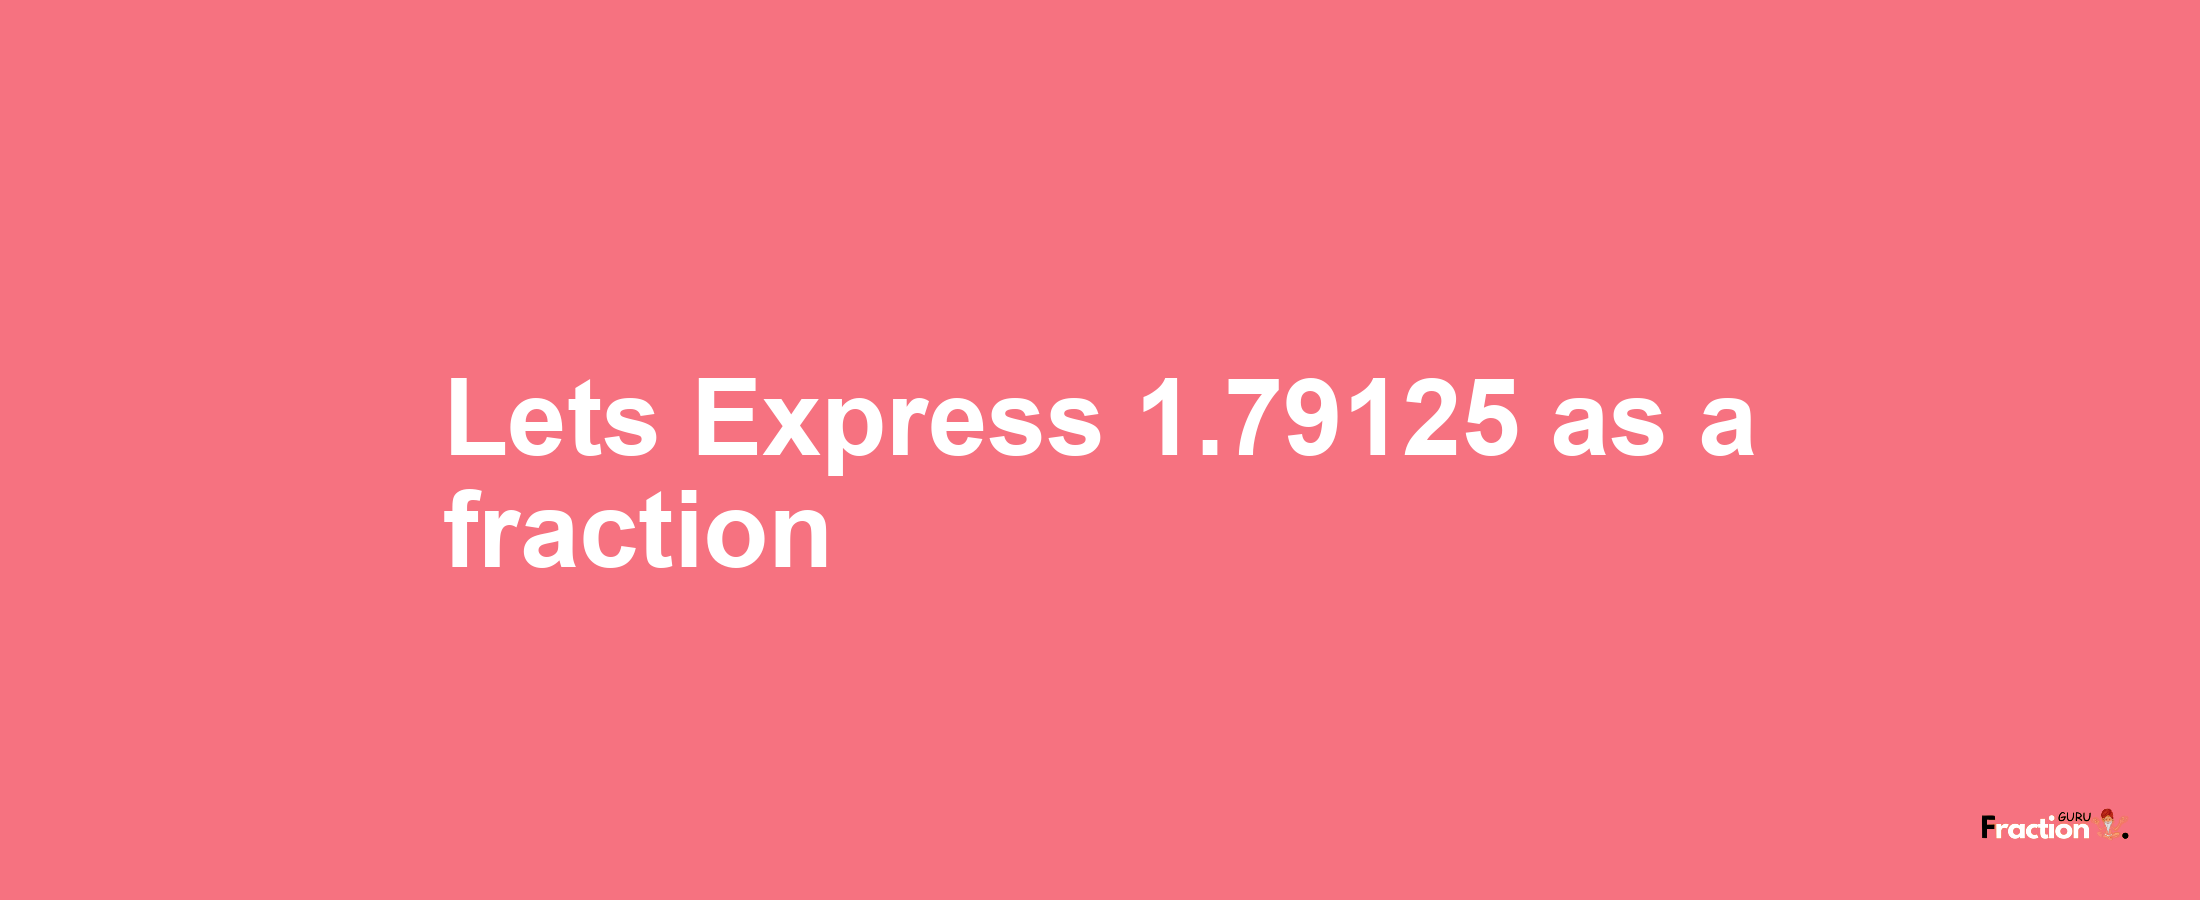 Lets Express 1.79125 as afraction